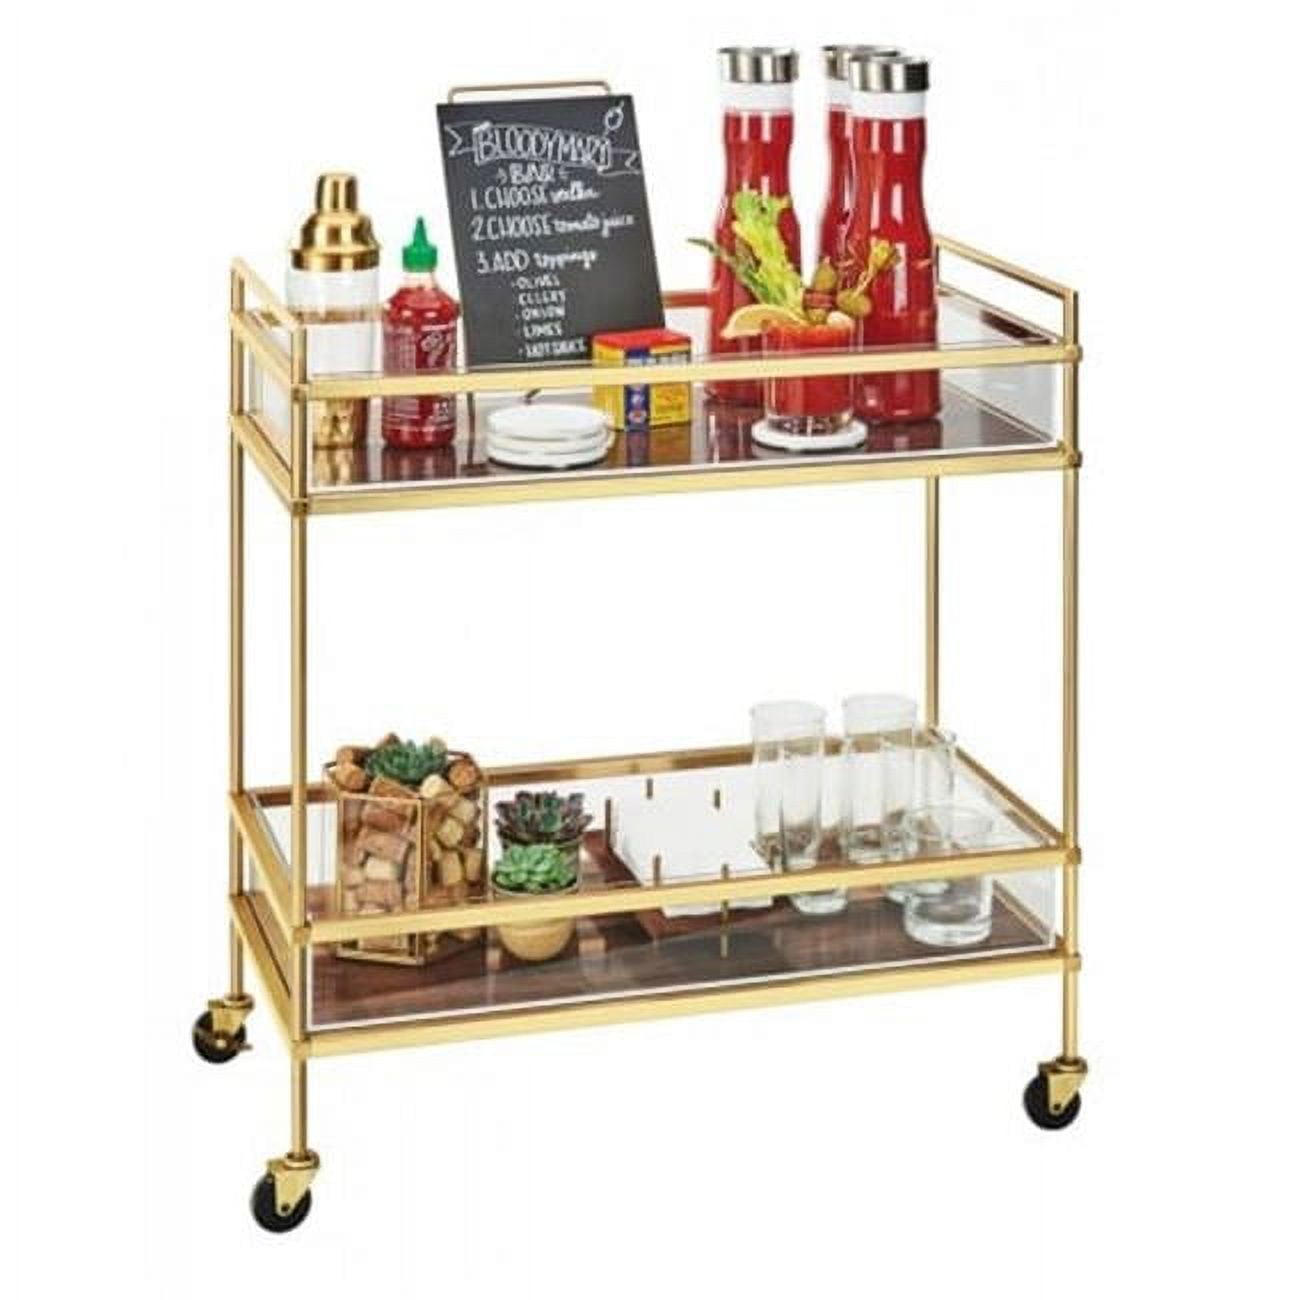 3719-49 Mid-century Chrome Beverage Cart With 2 Walnut Shelves - 27 X 16 X 36 In.